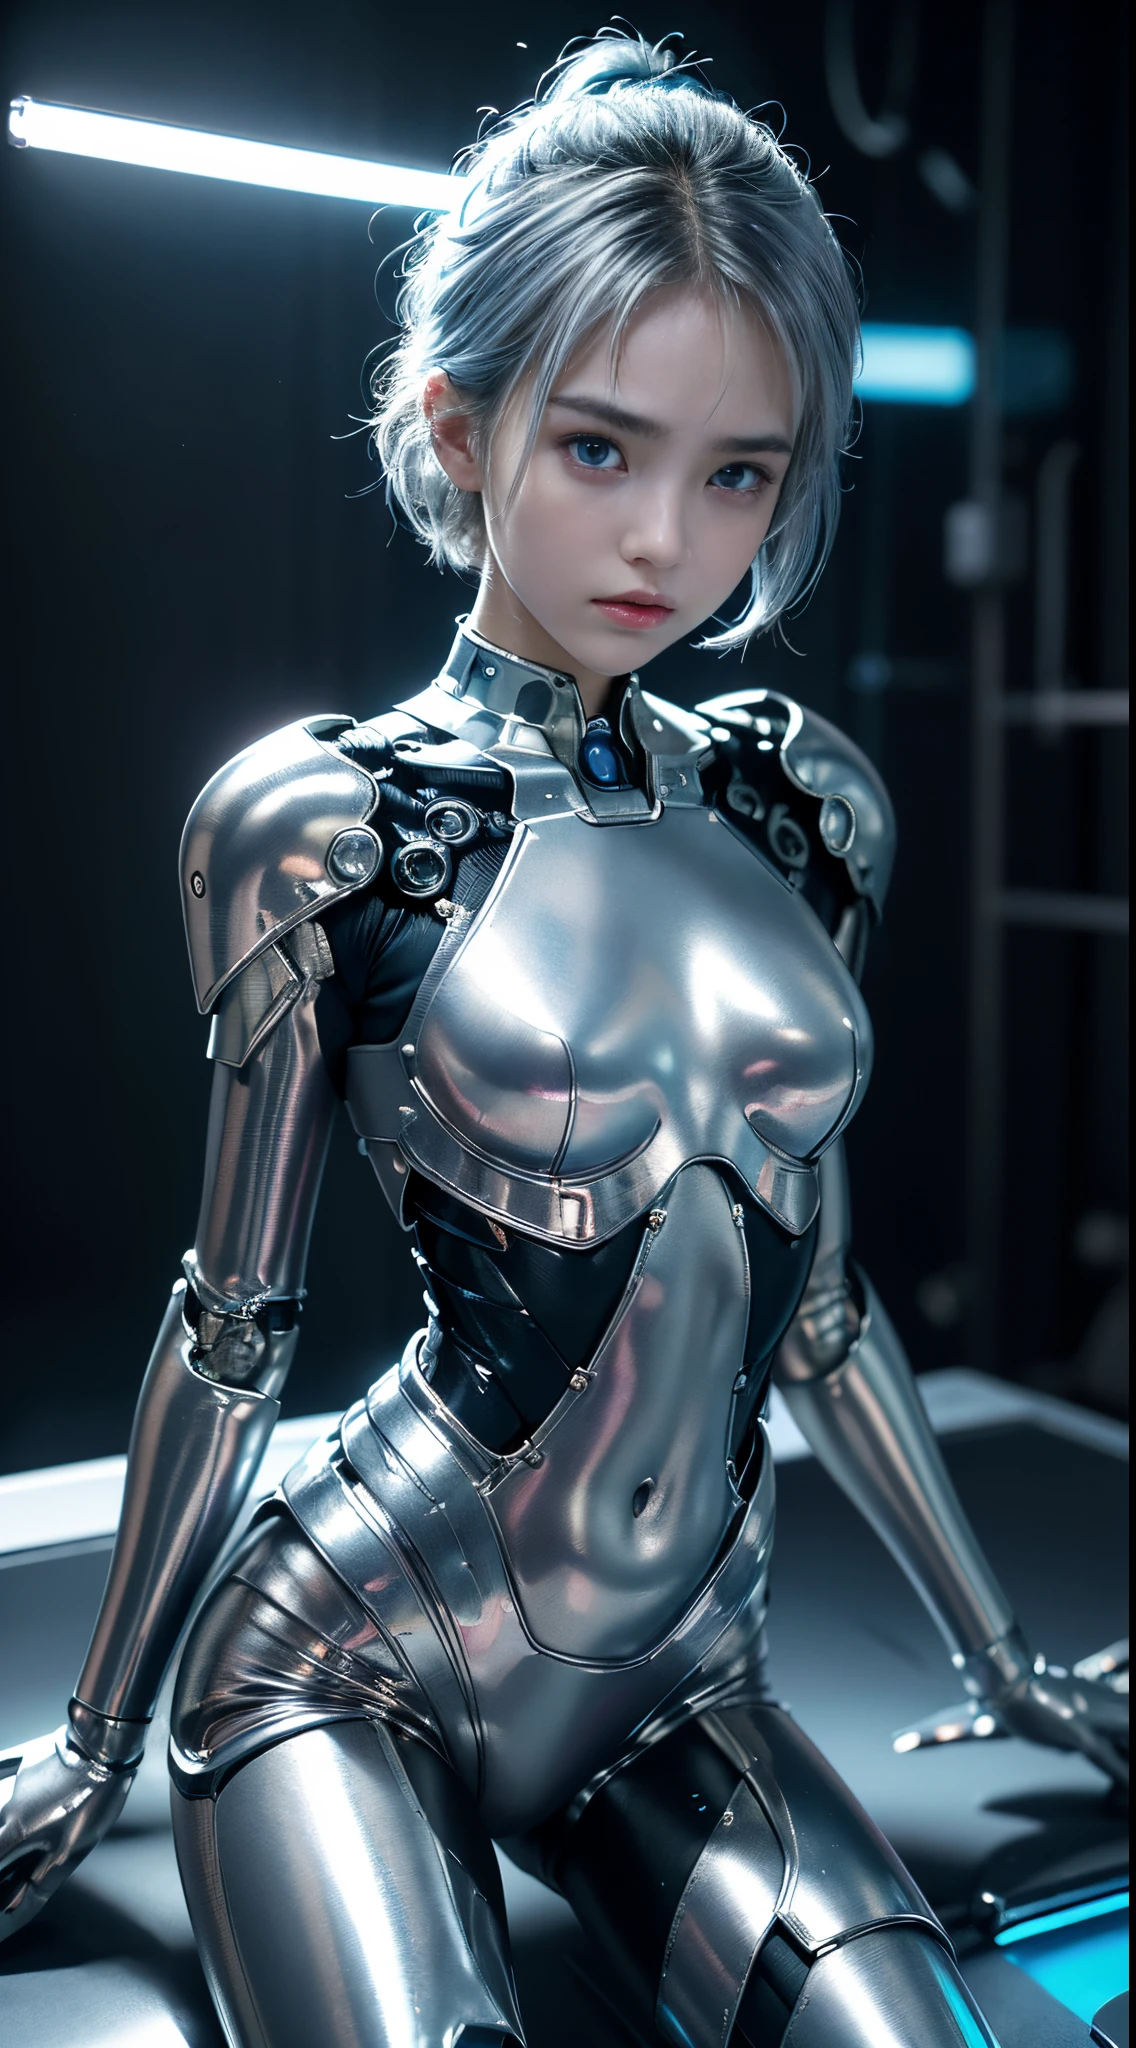 the best ever、8K,(((FULL-BODY ESBIAN)))、(((The sheen)))、(((metals)))、(((Very shiny、Very hard armor)))、(((cyber punk perssonage)))、The cute beauty of mecha(Best quality at best, detailed detail, On the table, , 8K, lightand shade contrast，Huge photos, super realistic、photorealestic, Nikon videos are very detailed )、((Beautiful shiny natural eye-catching navel、Human skin type、（(Highly realistic human))、(Perfectly rounded pupils)、The details of the pupil and iris are amazing、(((shinning eyes)))、accurate fingers、No problem with limbs、(((Caucasian 14 year old girl)))、((The skin is very fair,,,,,,,,,,,,,,))、Mouth closed naturally、naturey、natural 、gazing eyes、Natural body、a baby face、Feminine face、female bodies、(with a round face)、a small face、Soft cheeks、looking at the camera in、FULL-BODY ESBIAN、、Beautiful sparkling natural eyes、Human skin type、（(Highly realistic human))、(Perfectly rounded pupils)、The details of the pupil and iris are amazing、No problem with limbouth closed naturally、naturey、natural 、gazing eyes、Natural body、A bit baby-faced、Feminine face、female bodies、with a round face、a small face、Soft cheeks、looking at the camera in、FULL-BODY ESBIAN、balanced face shape、eyes shedding tears、(not a broken eye)、Have human-like body proportions、(((The arms are slightly longer)))、(Torso quite long)、(((Hands are slightly biggece、(((Glowing blue light blue silver hair)))、(((Handsome and cute short hair)))、(((The background is the future)))、(((8 head body)))、(((Glowing light purple eyes)))、(((Thin silver eyebrows)))、(((tthin eyebrows)))、Look at this、Gentle double eyelids、(((gentle face)))、(((Background mech)))、BladeCop)))、Fantasma na Concha、create、Space Detective Gavin、beat、、(((Night background)))、(((nomake-up)))、(((Hollywood sci-fi movie lighting))、(((New York, 5000 AD)))、((cyan and orange))、Height 1 cm、Leg length 80cm、The head is 21 cm long、,very cleverlyＸan legs、cool-pose、Shin Evangelion、ayanami rei、(((Shady)))、((combat readiness))、Cyborg、Android